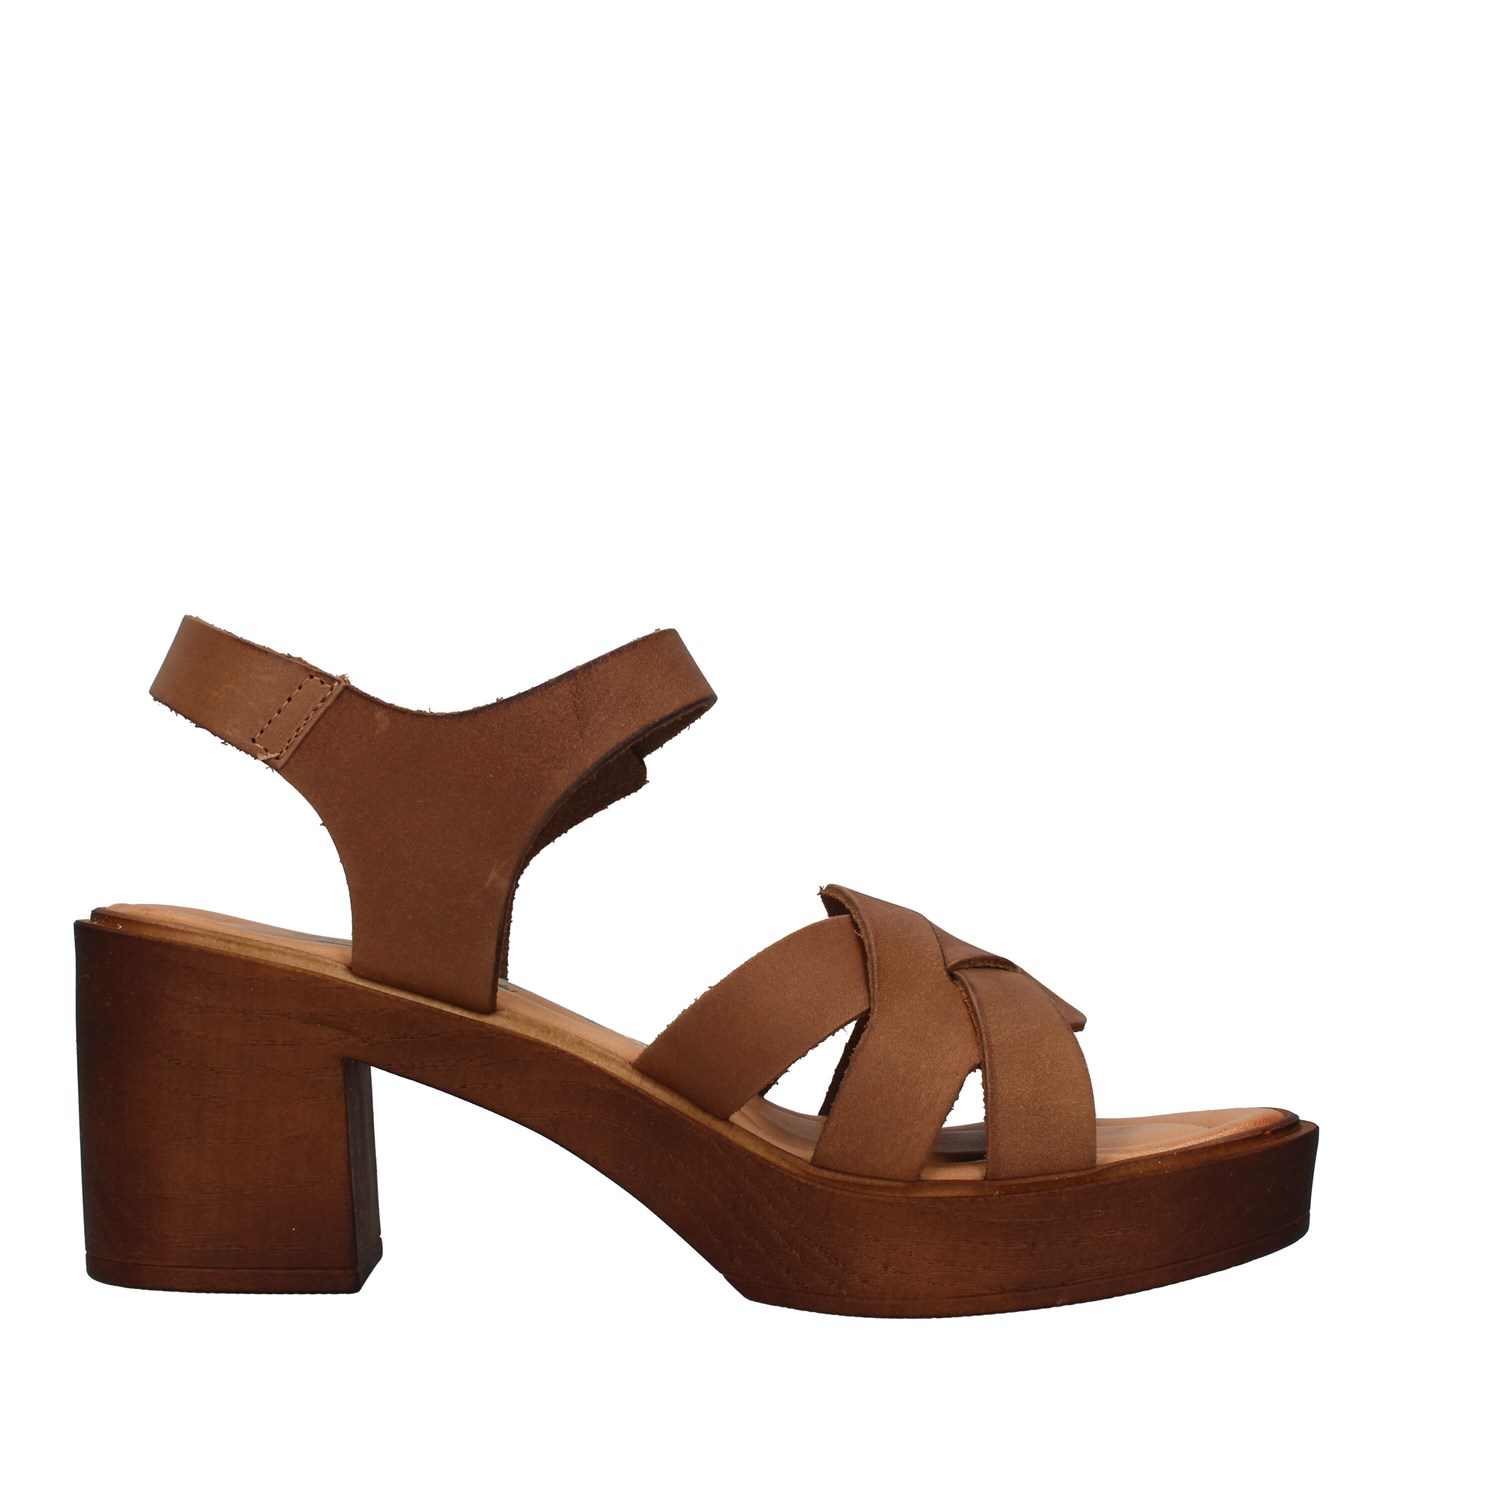 Bionatura Shoes Woman With heel BROWN 99A2268